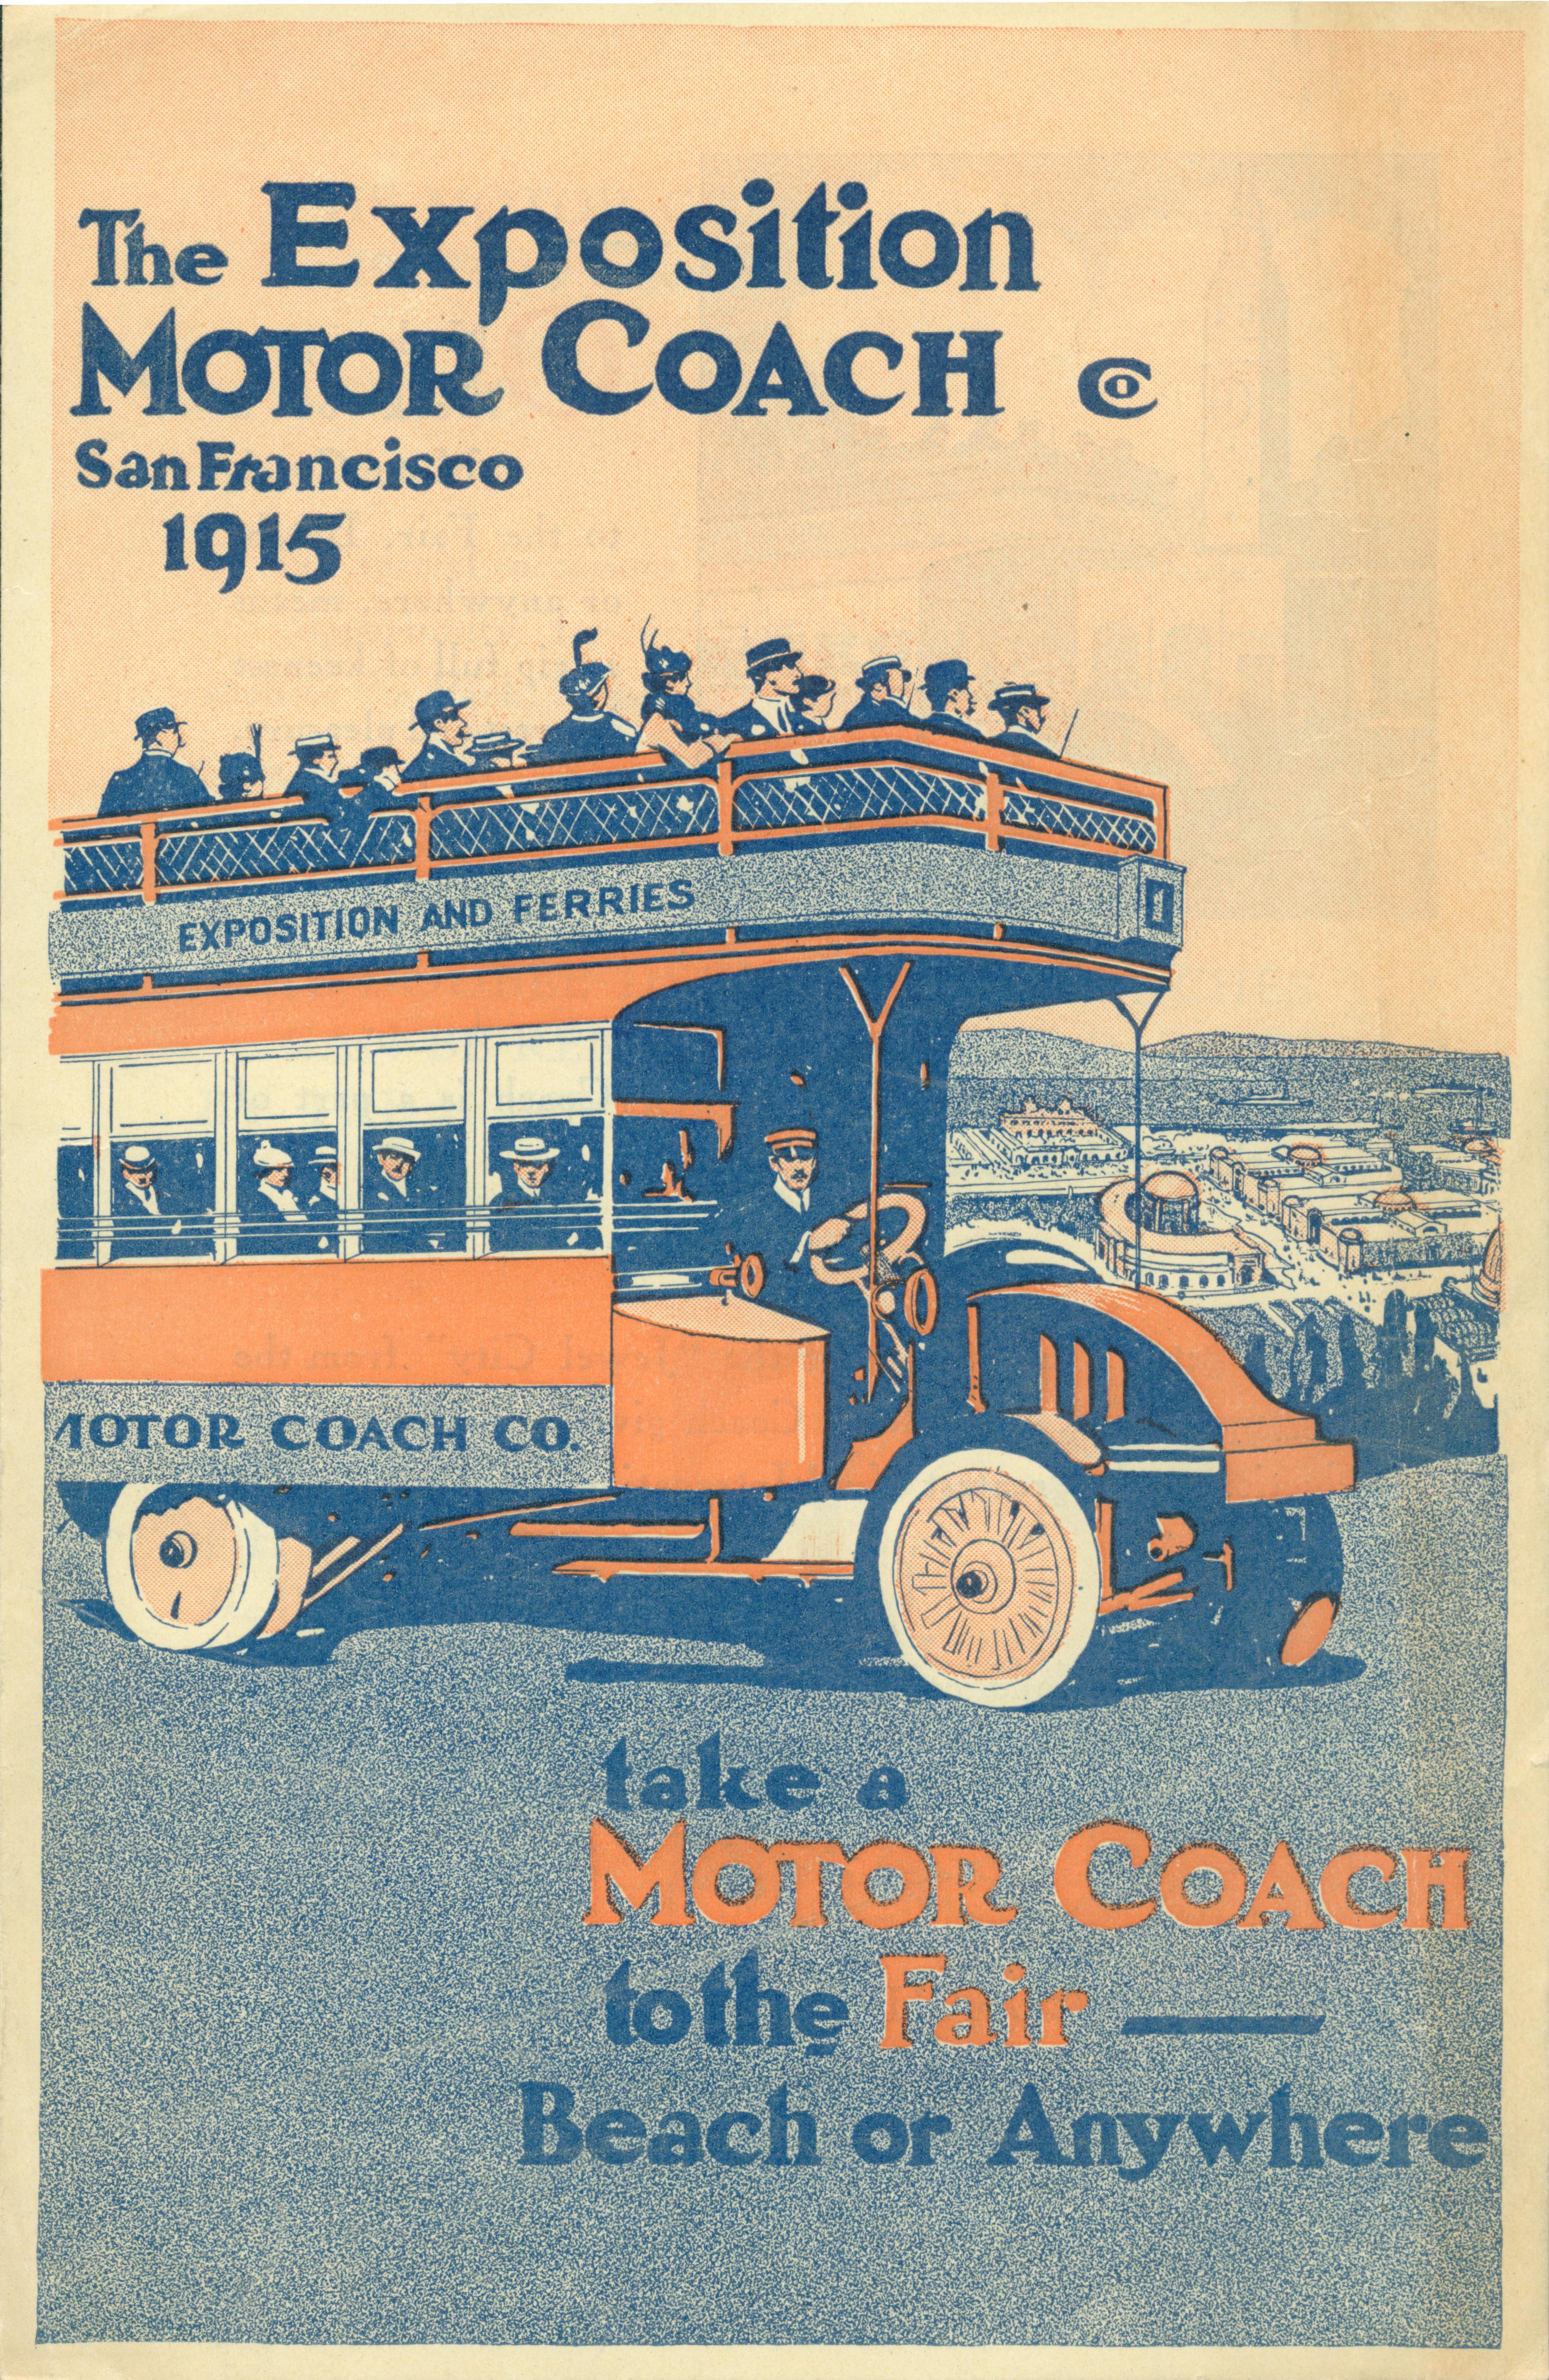 The front of this pamphlet shows a loaded bus with an open upper deck with the pamphlet title above and below.